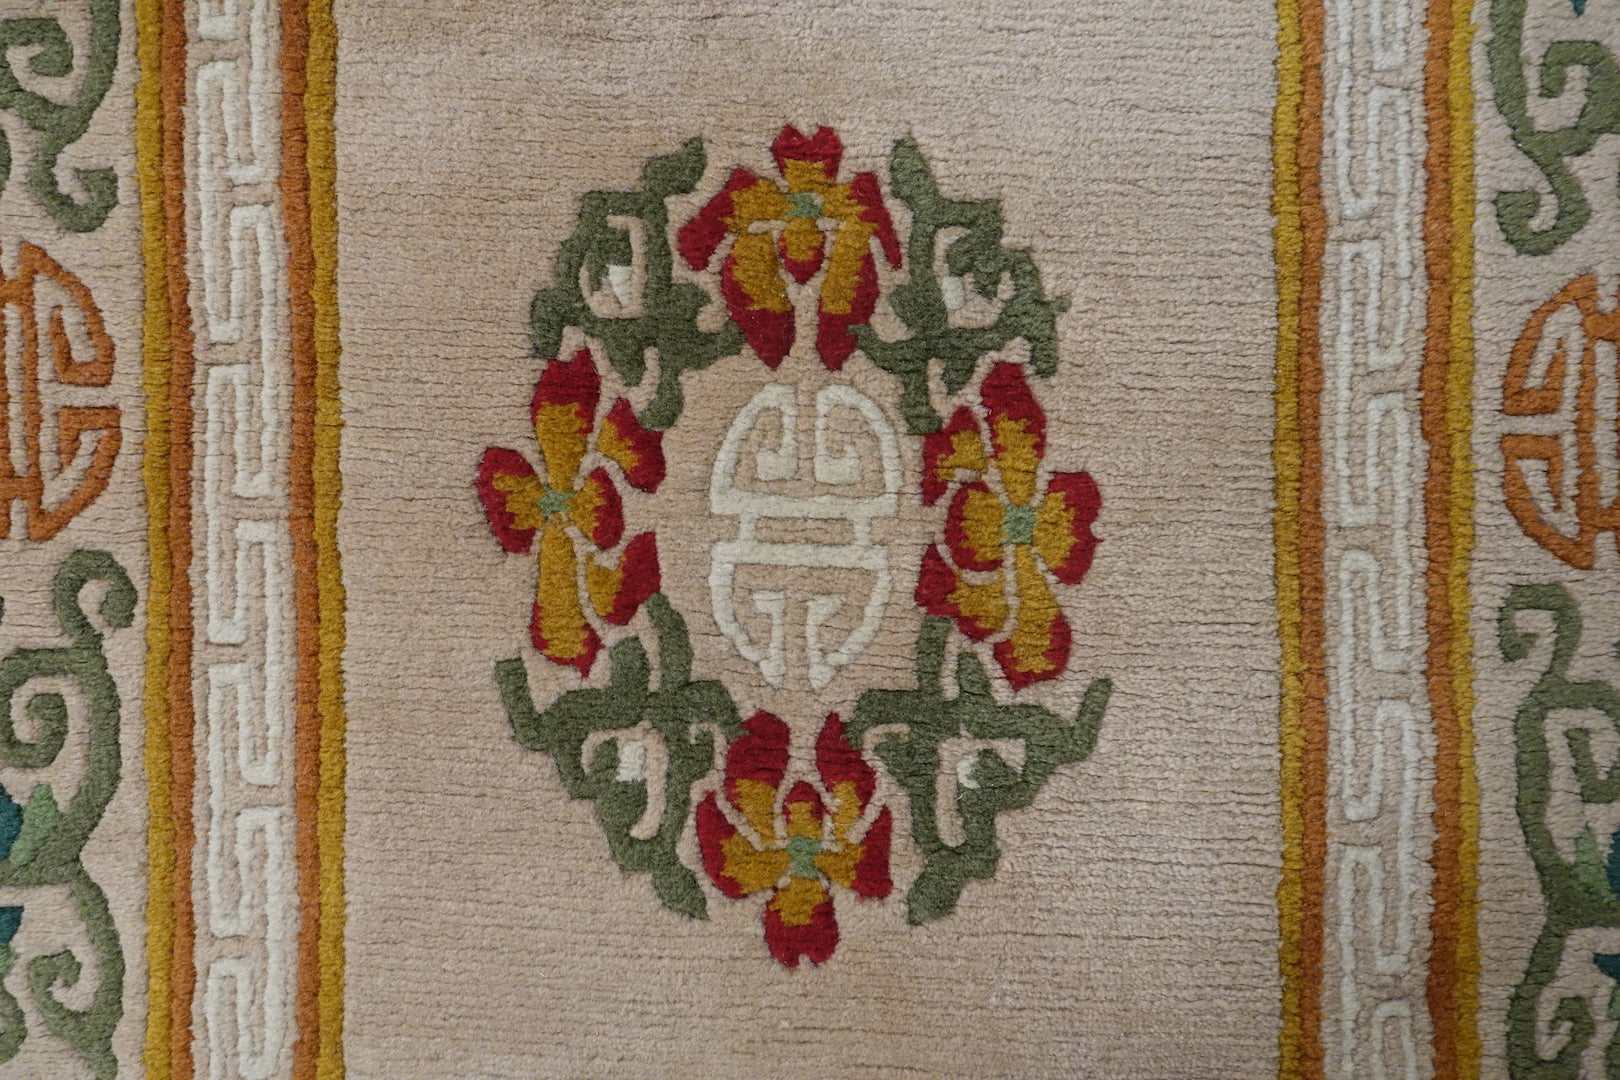 A 3 by 6 feet tibetan wool rug. The colours used are red, mustard, tan, green and white.